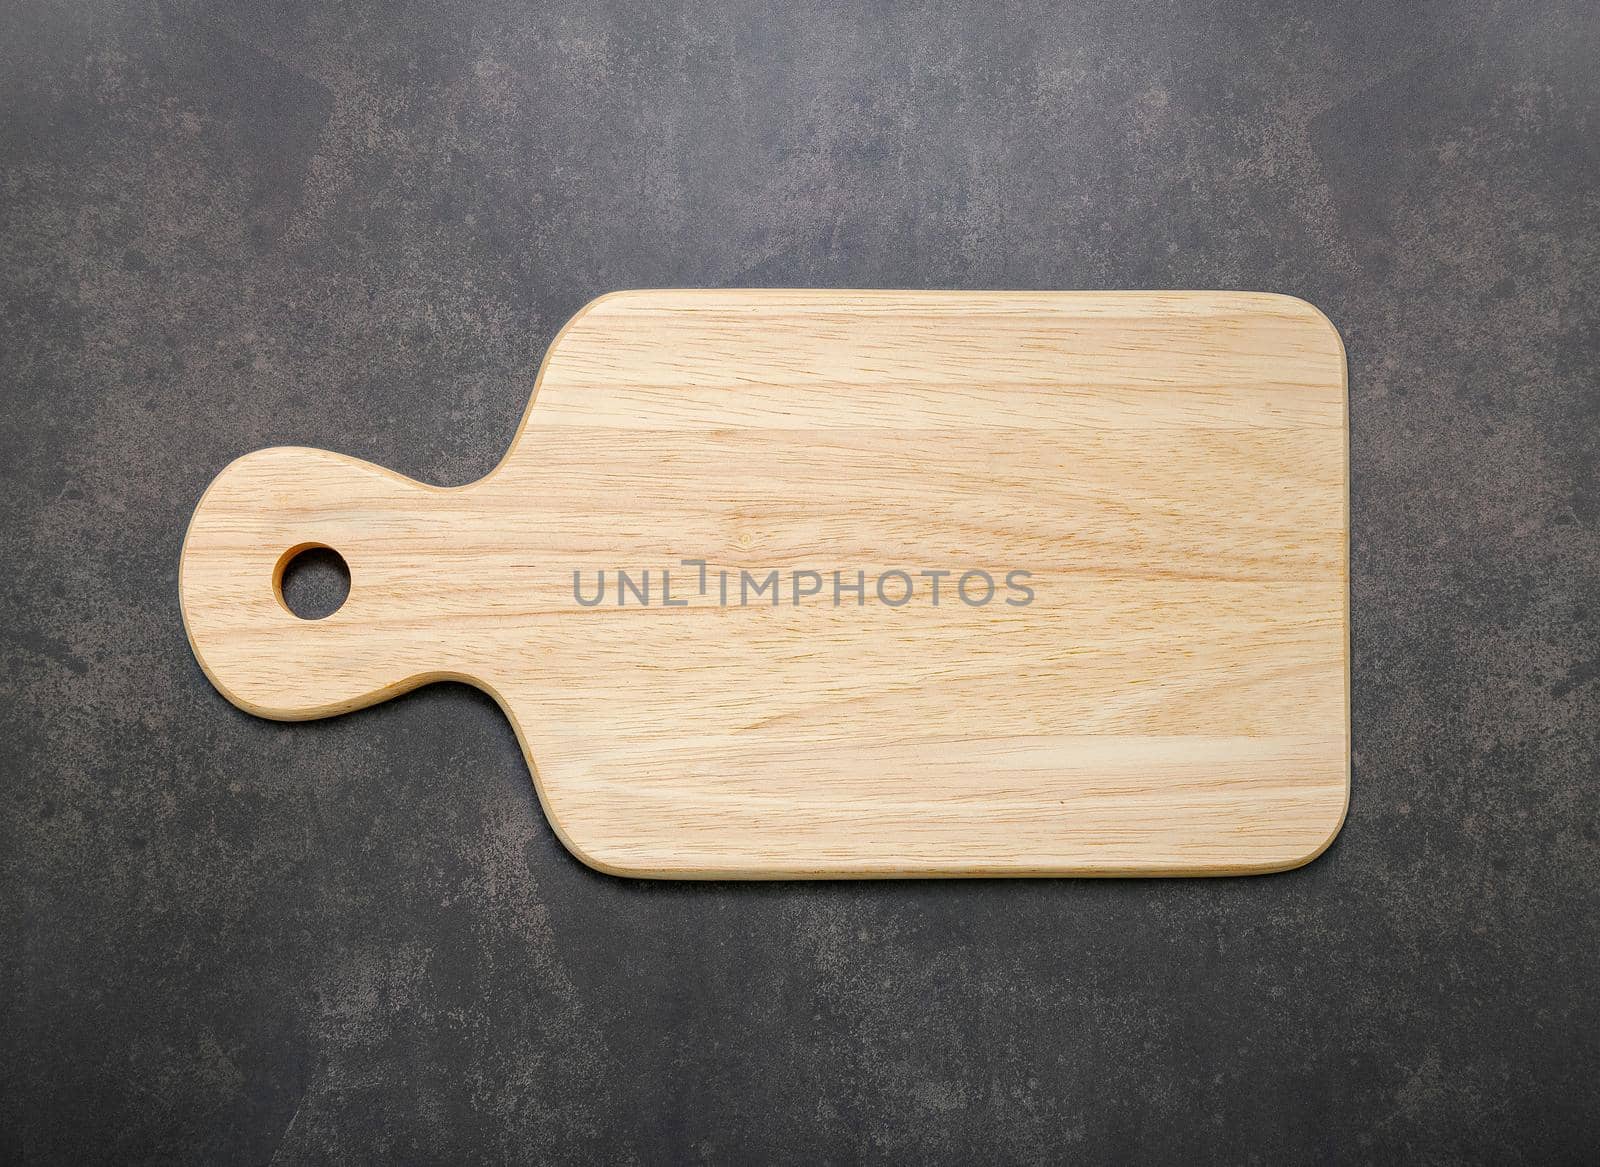 Empty vintage wooden cutting board set up on dark concrete background with copy space.